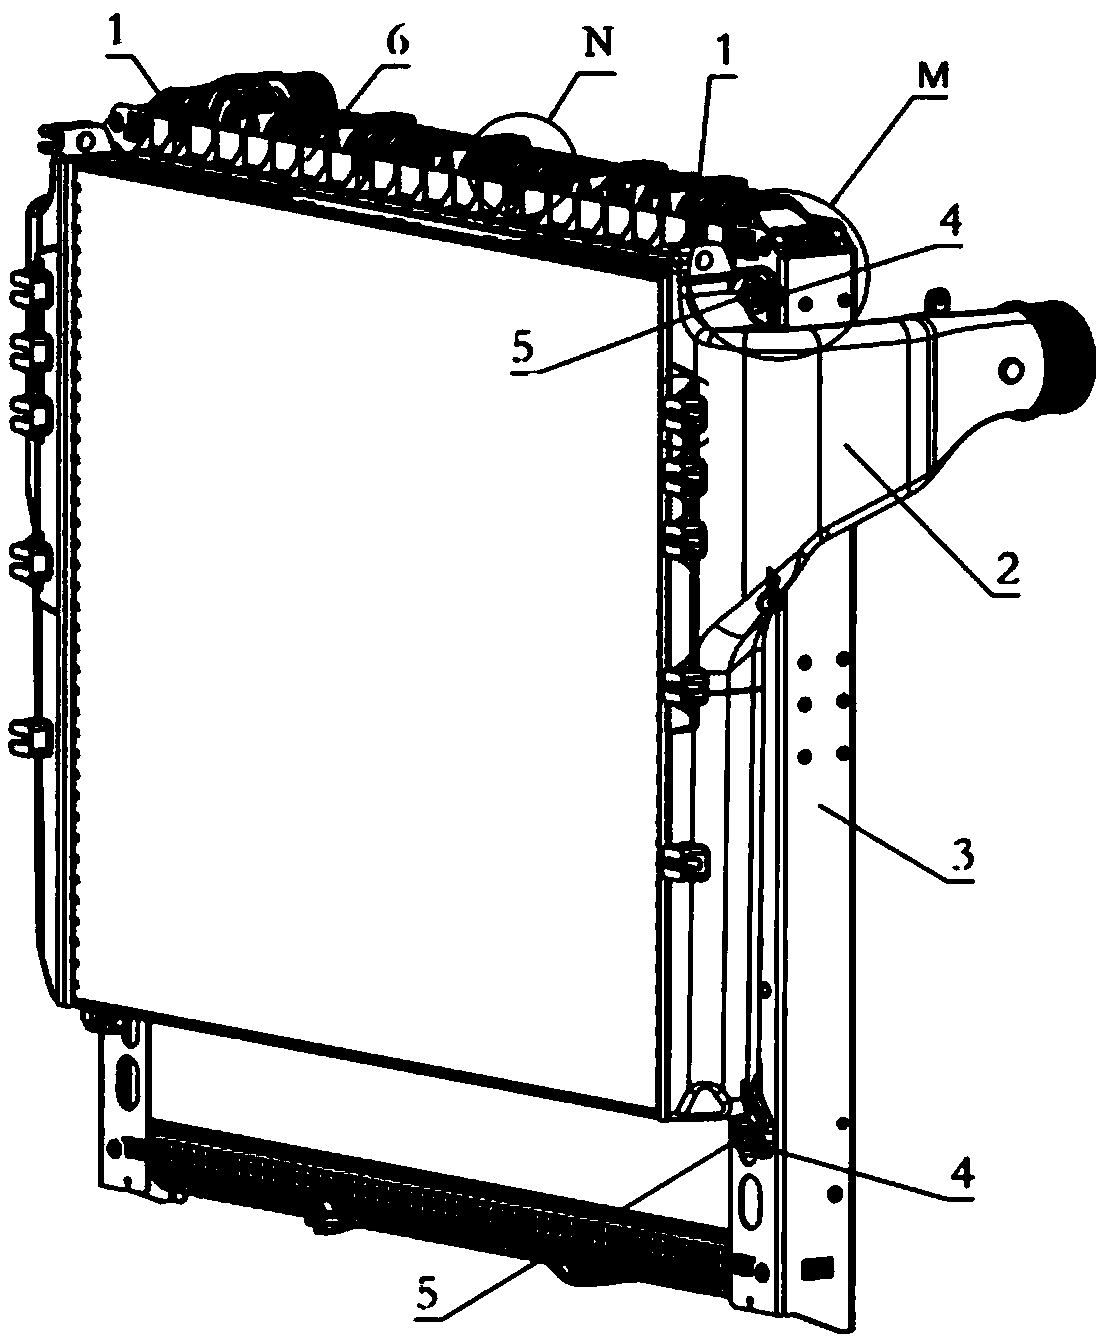 Cooling module assembly and vehicle